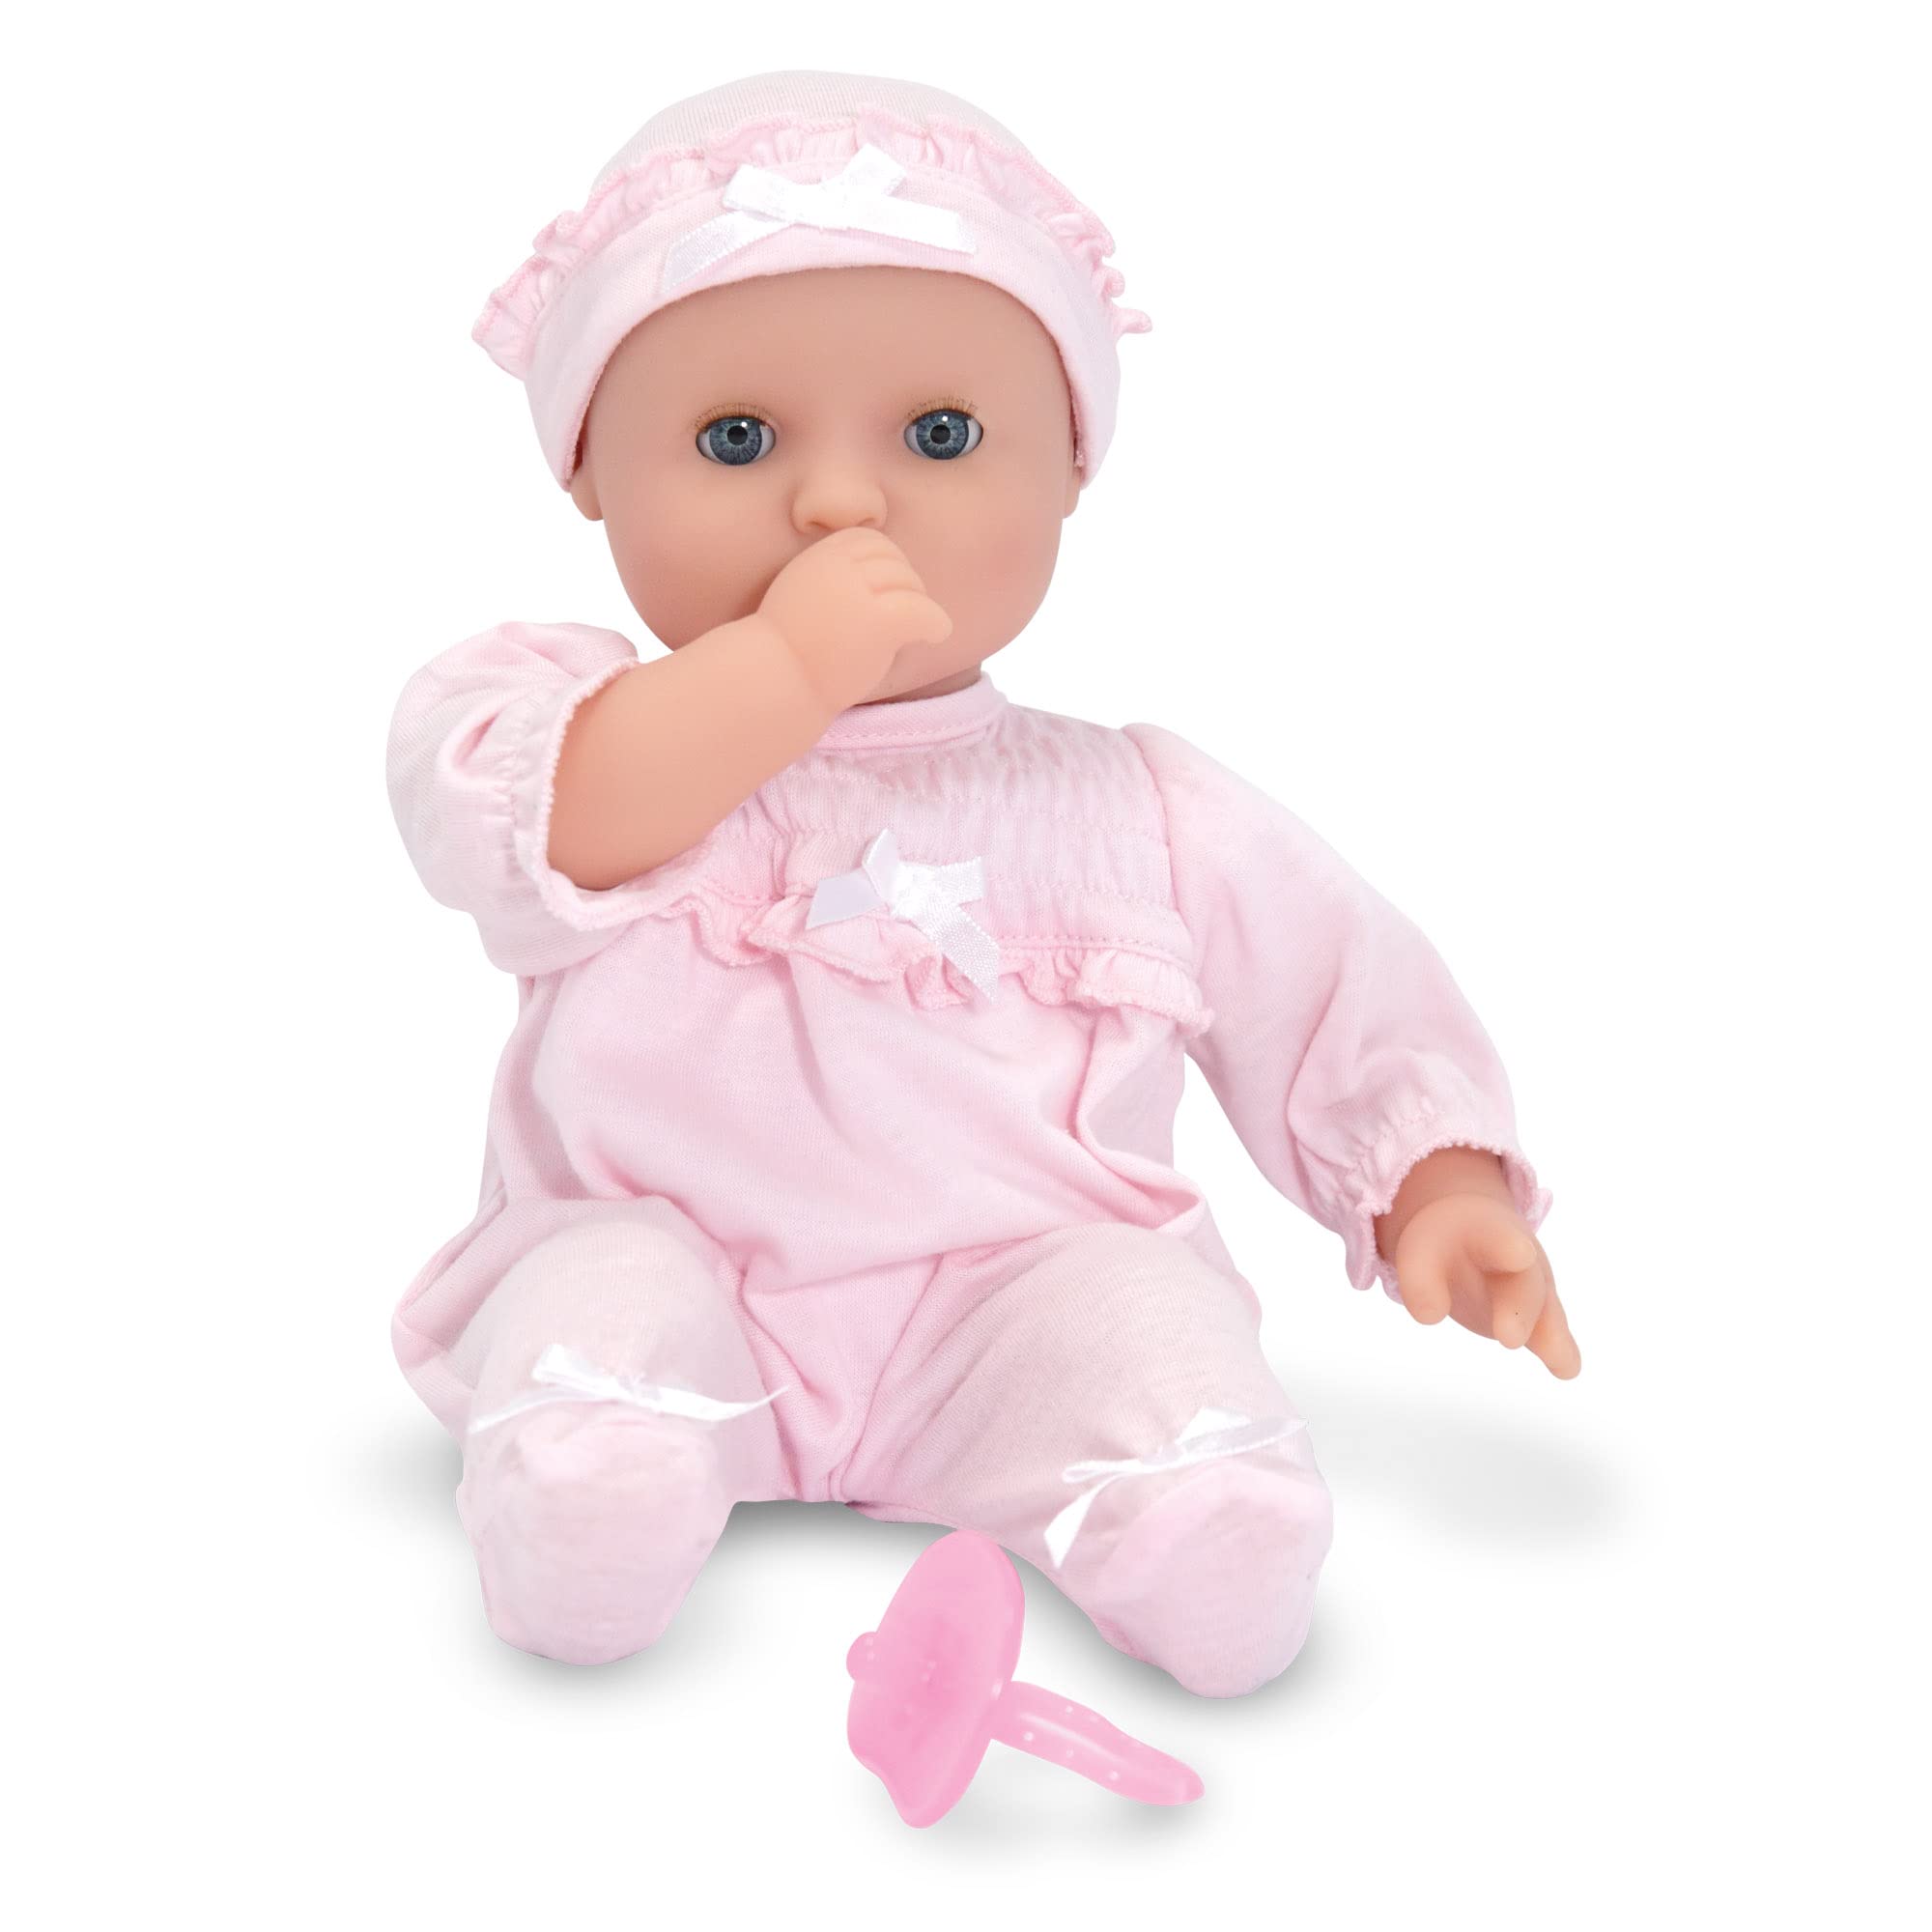 Melissa & Doug Mine to Love Jenna 12-Inch Soft Body Baby Doll (Frustration-Free Packaging, Great Gift for Girls and Boys – Best for Babies, 18/ 24 Month Olds, 1 and 2 Year Olds))